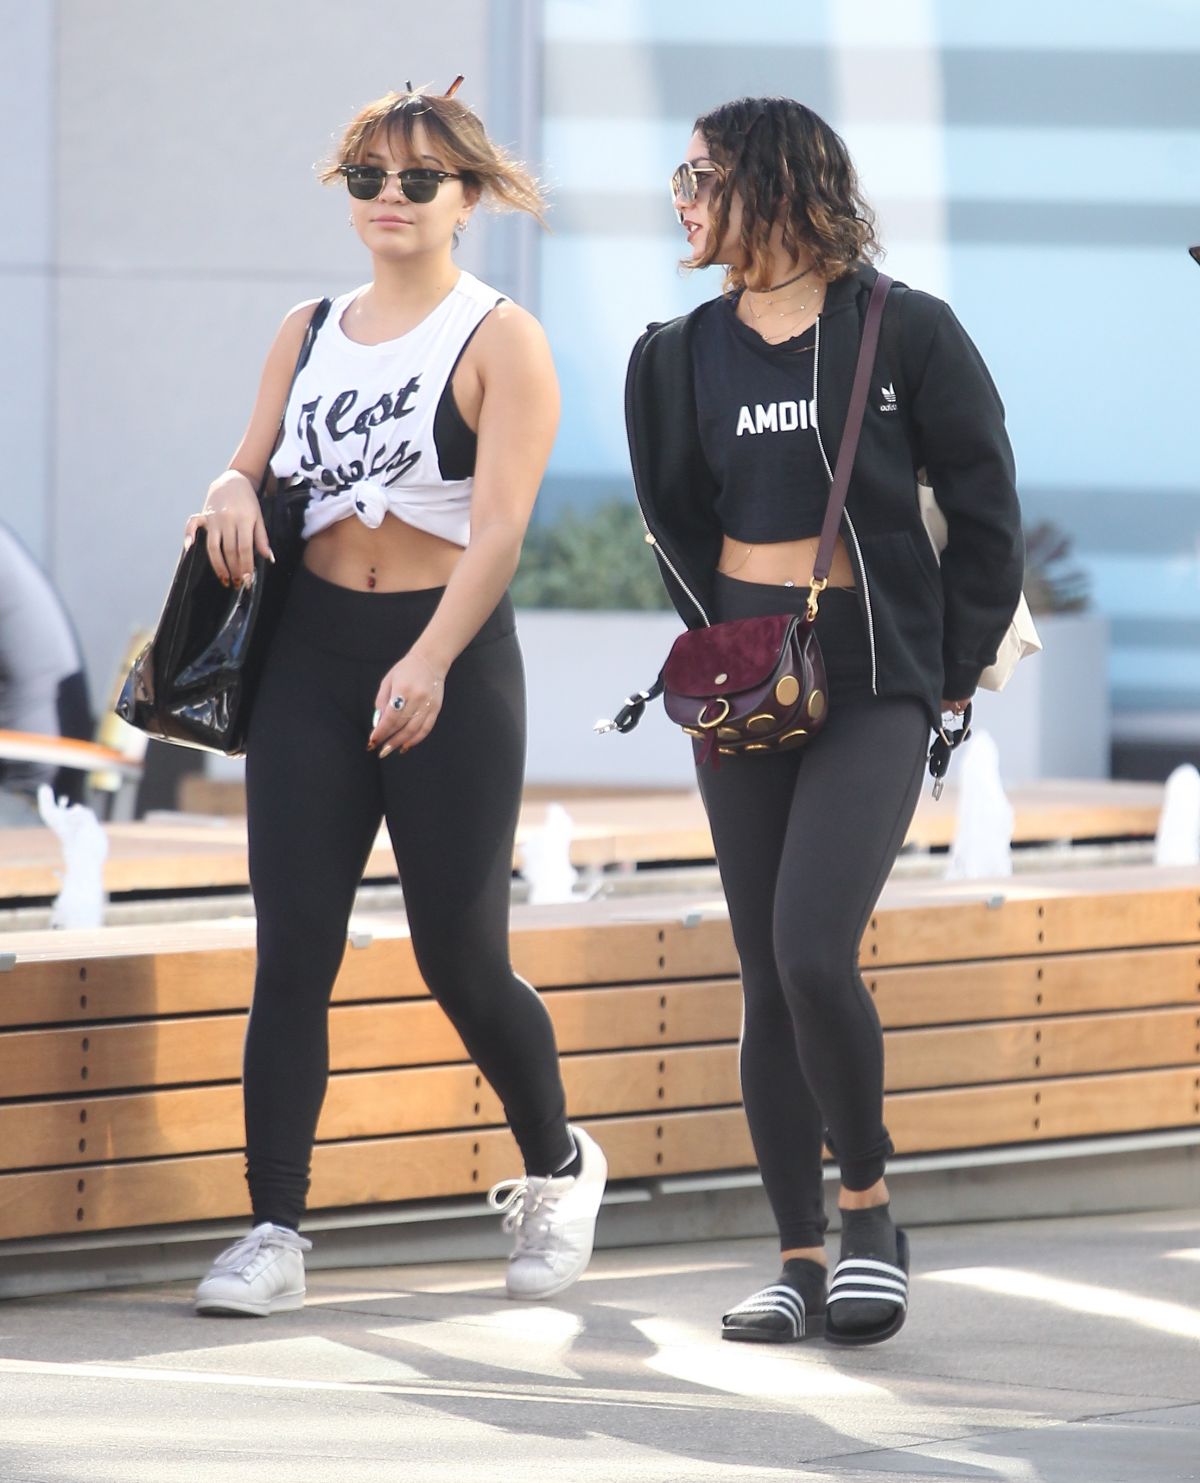 vanessa-and-stella-hudgens-heading-to-a-gym-in-west-hollywood-11-09-2016_3.jpg